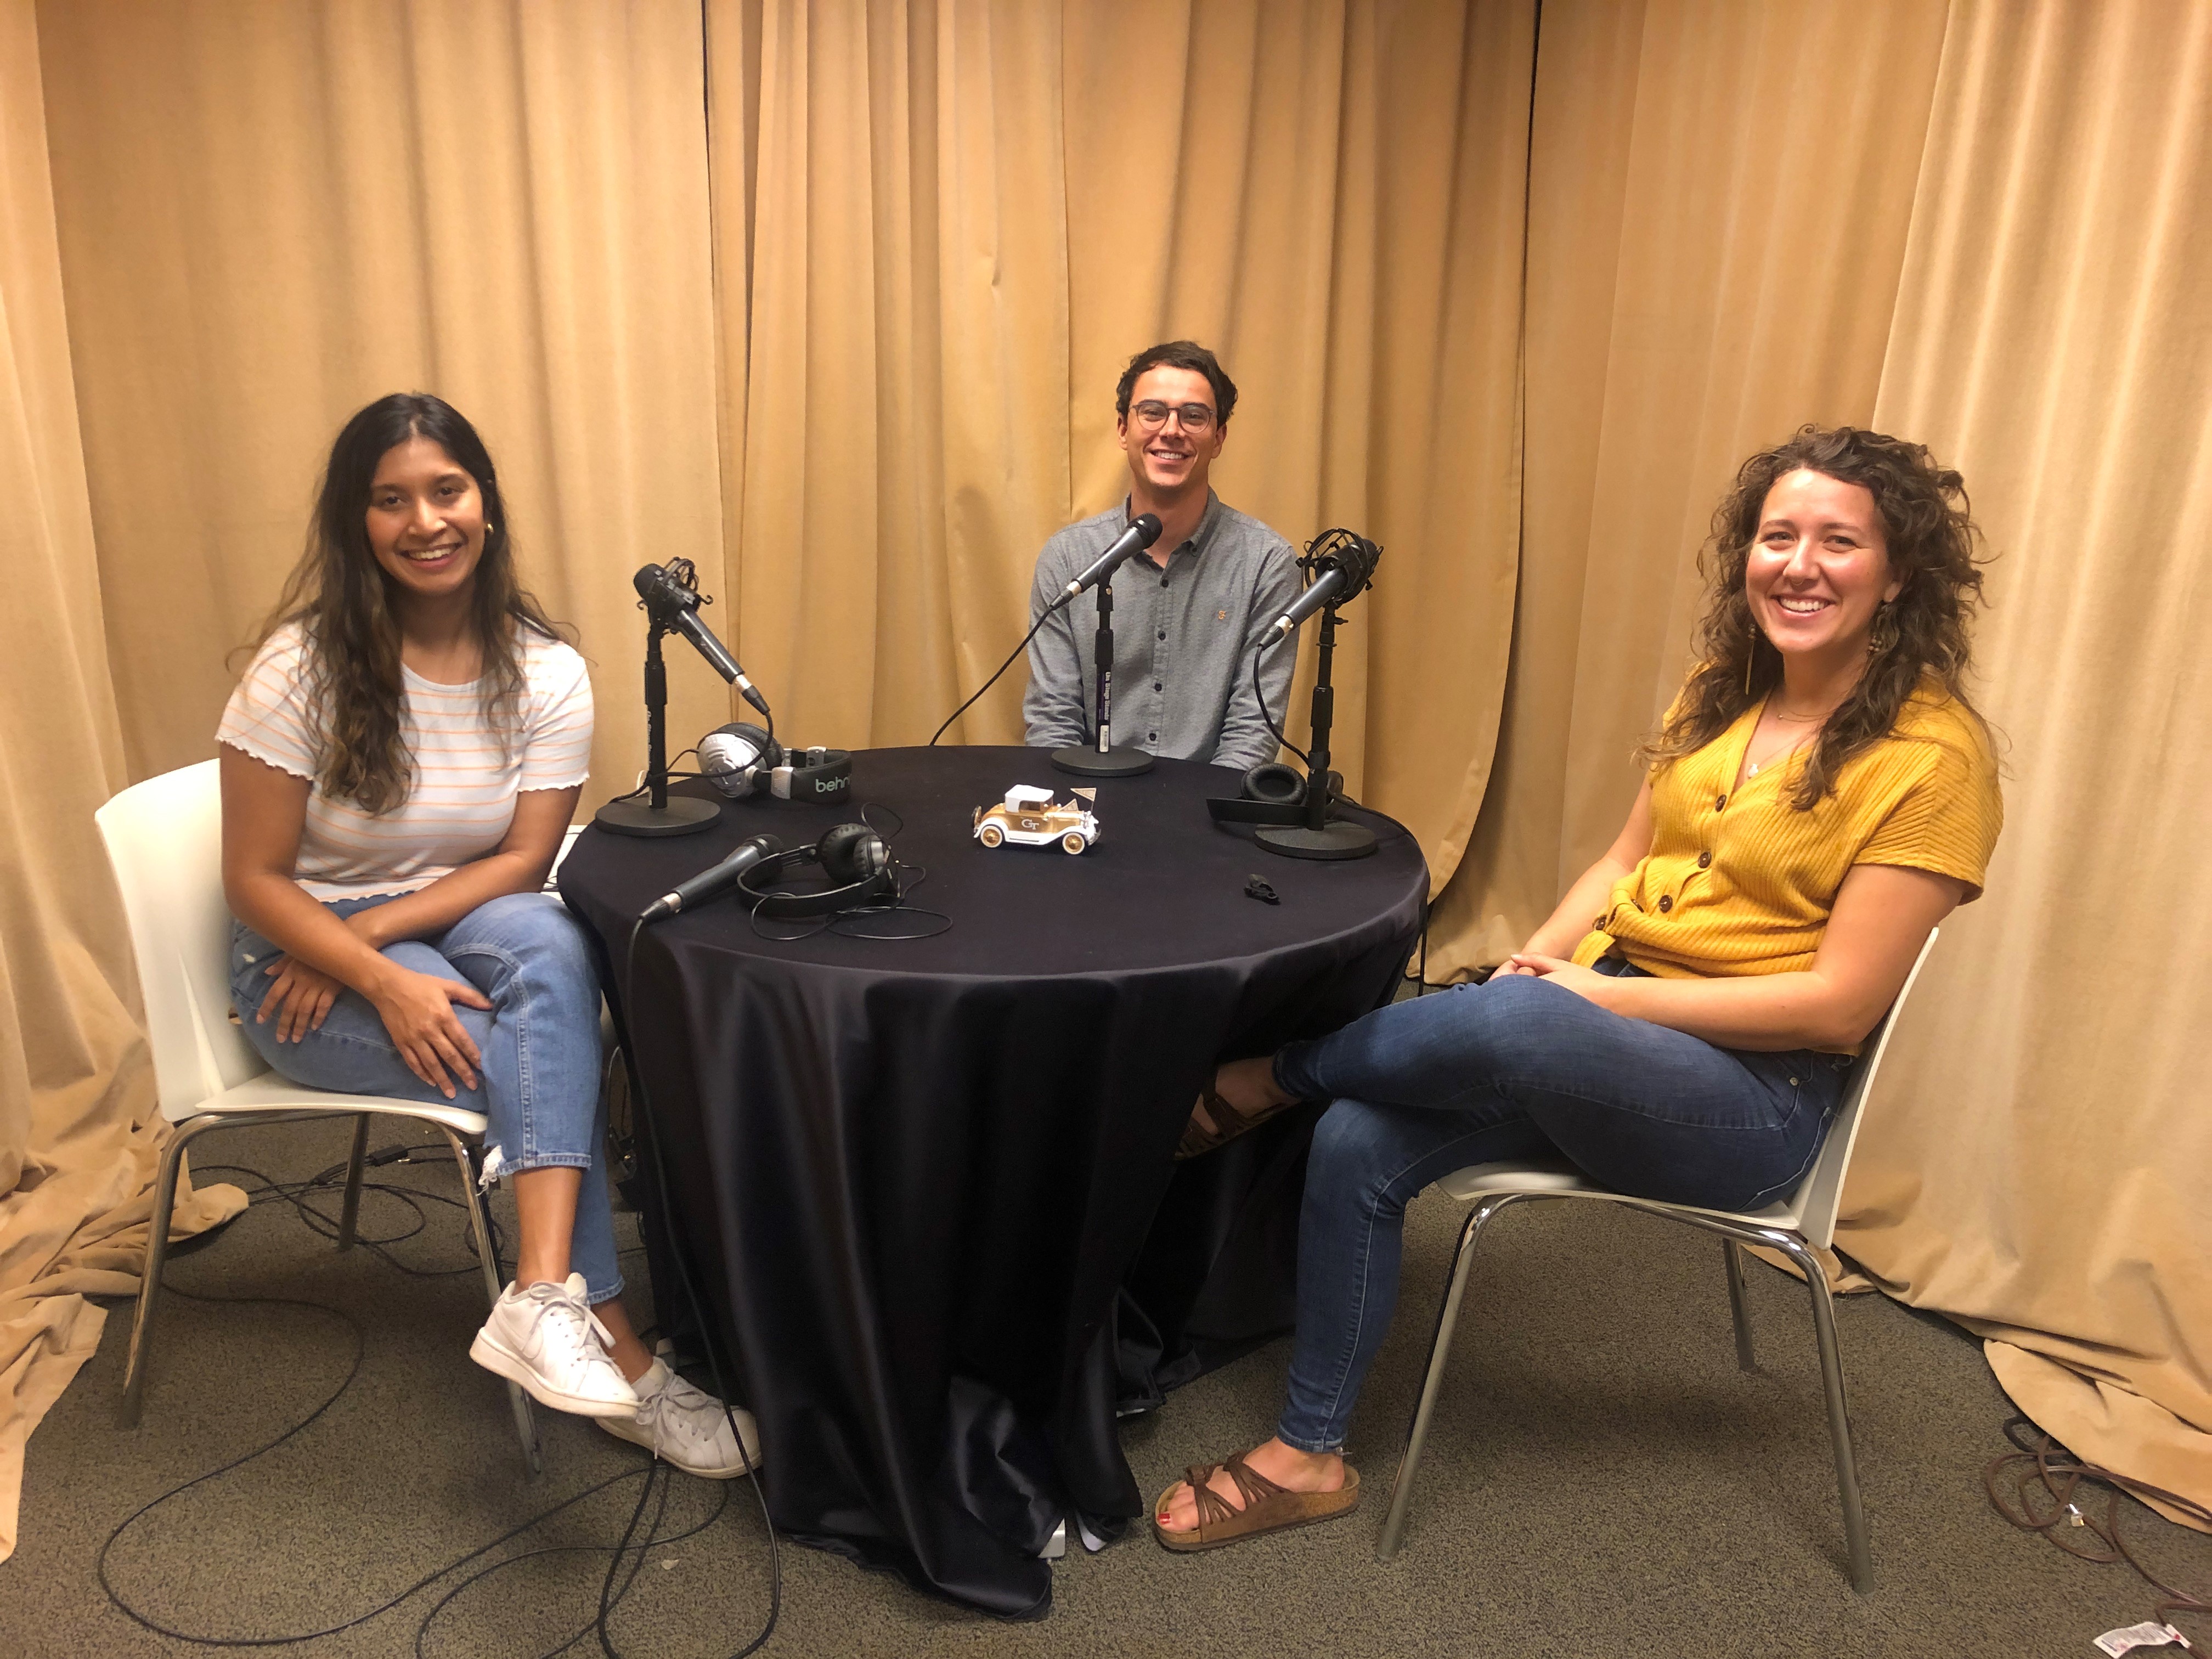 MBA student and host, Leo Haigh, talks with the current and former president of the MBA Women in Business club, Nammu Kumar and Amanda Grupp.